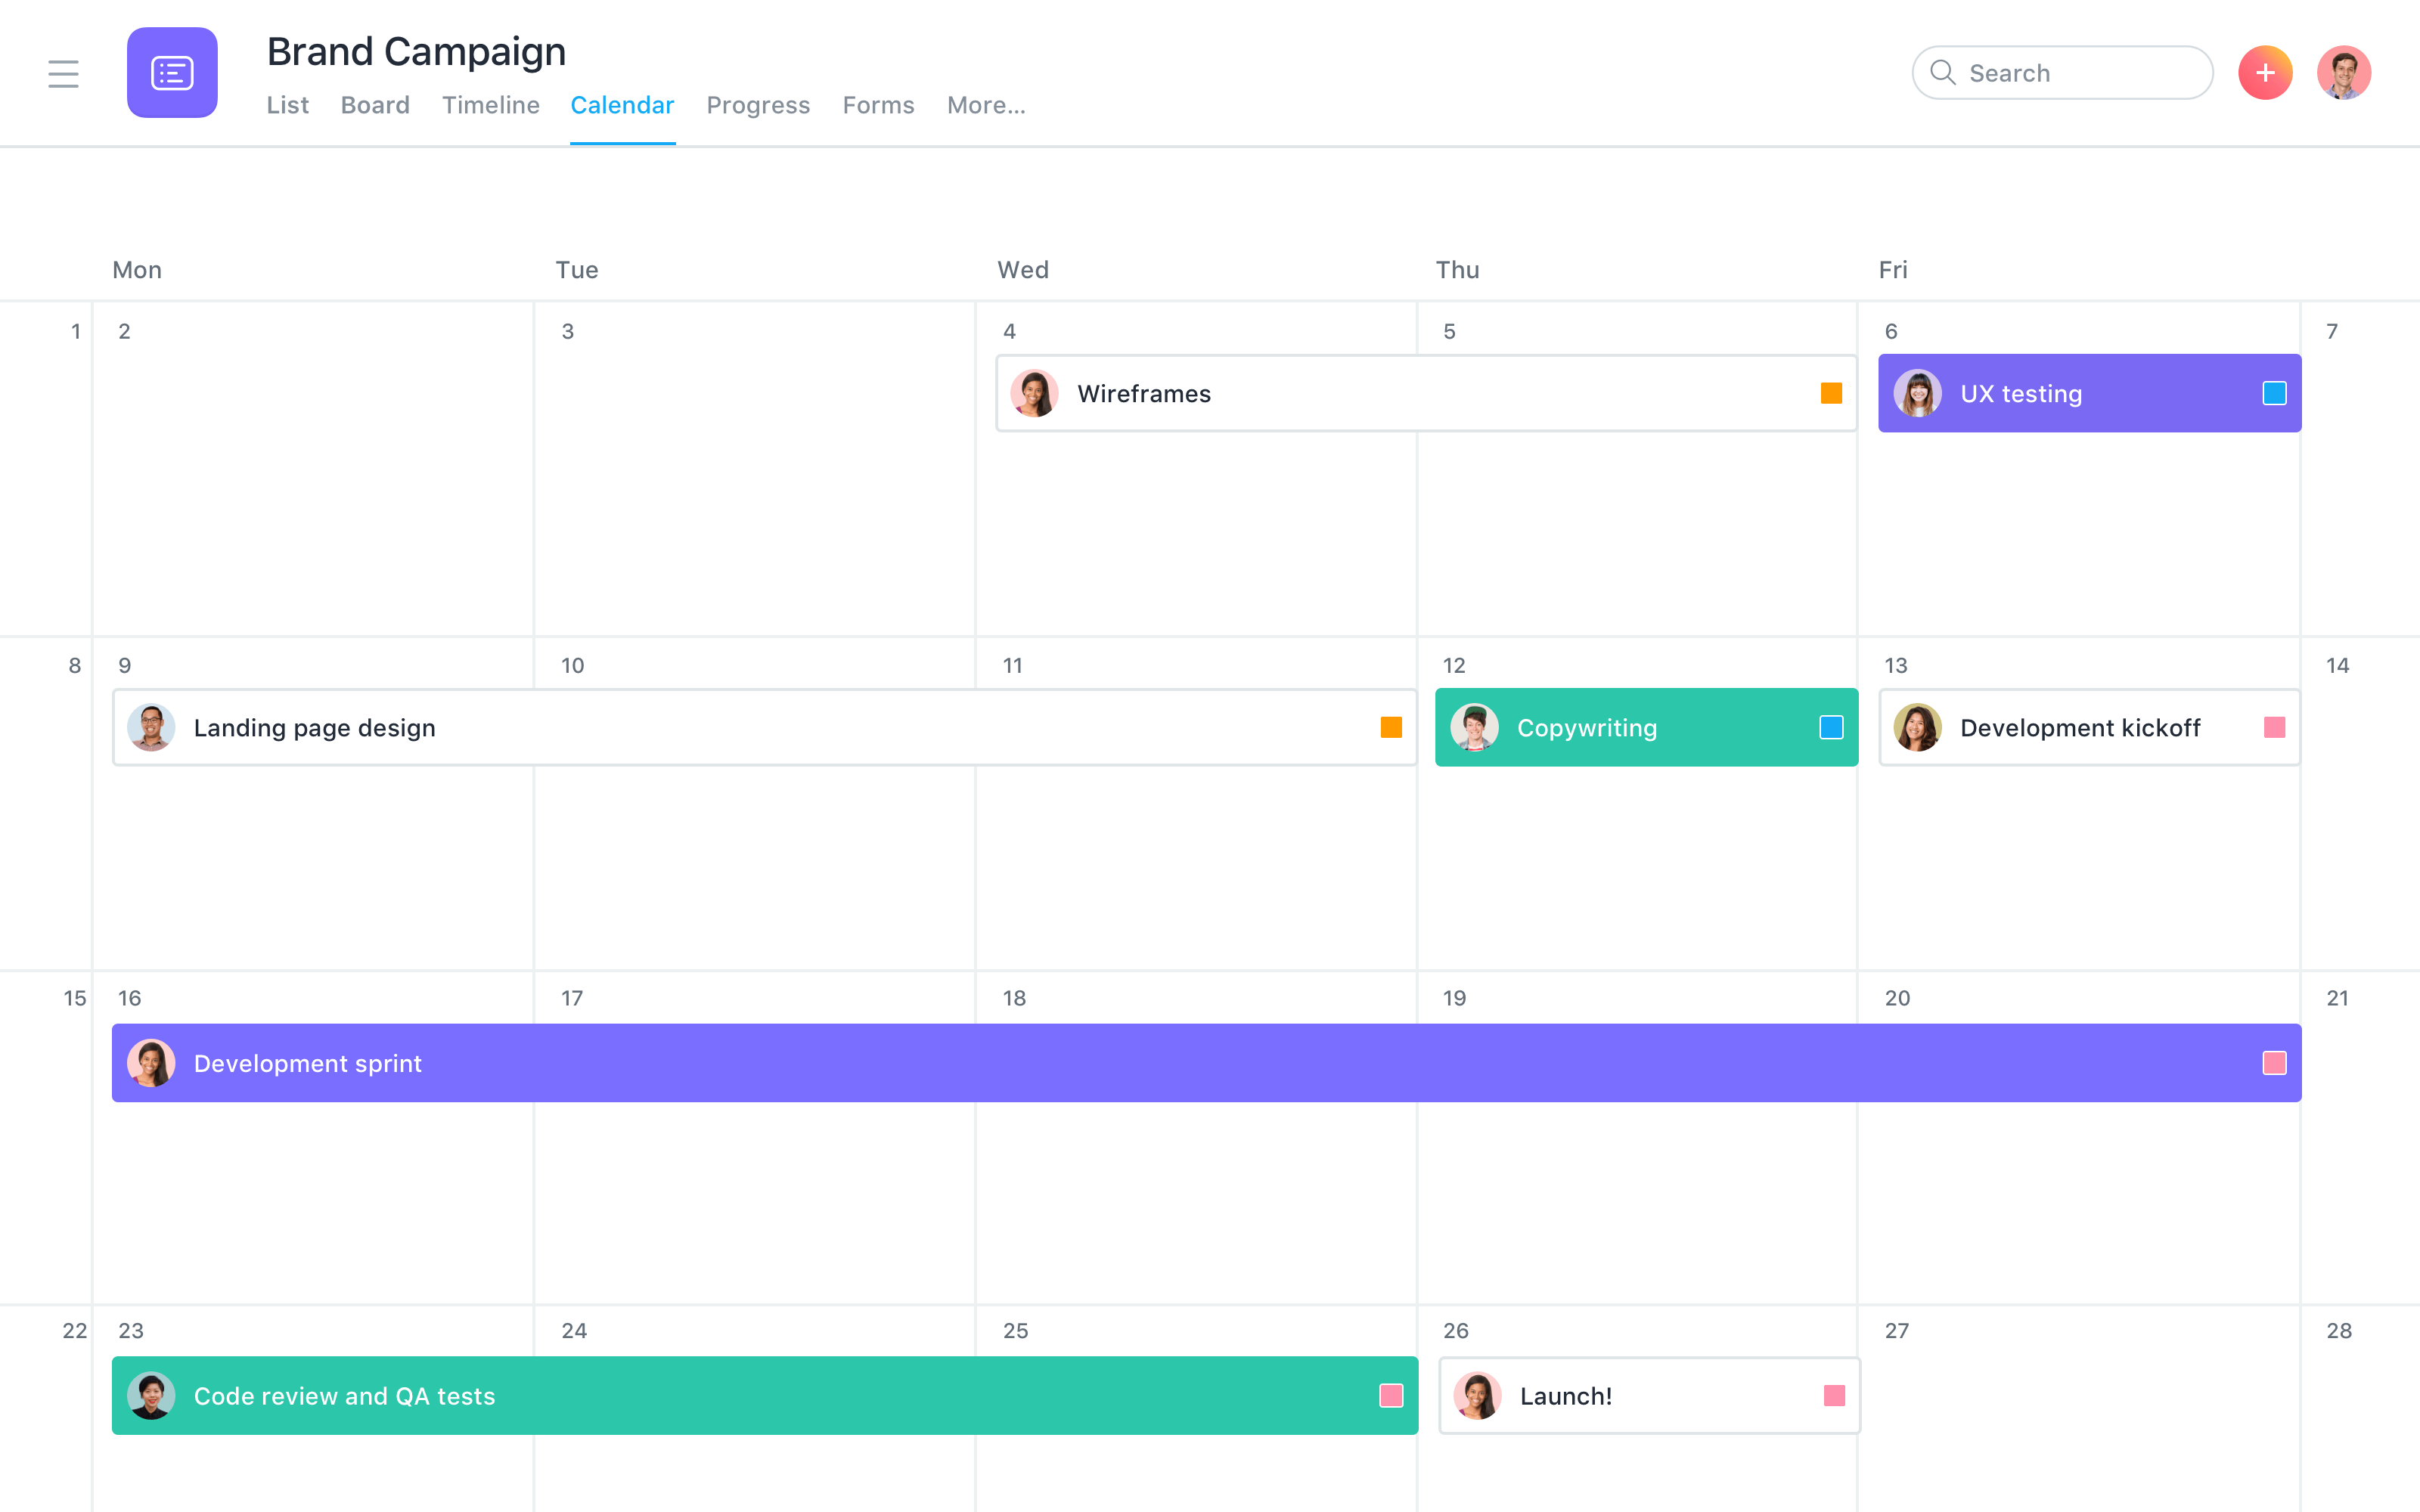 Asana is primarily a team and project management app, with related calendar functions.